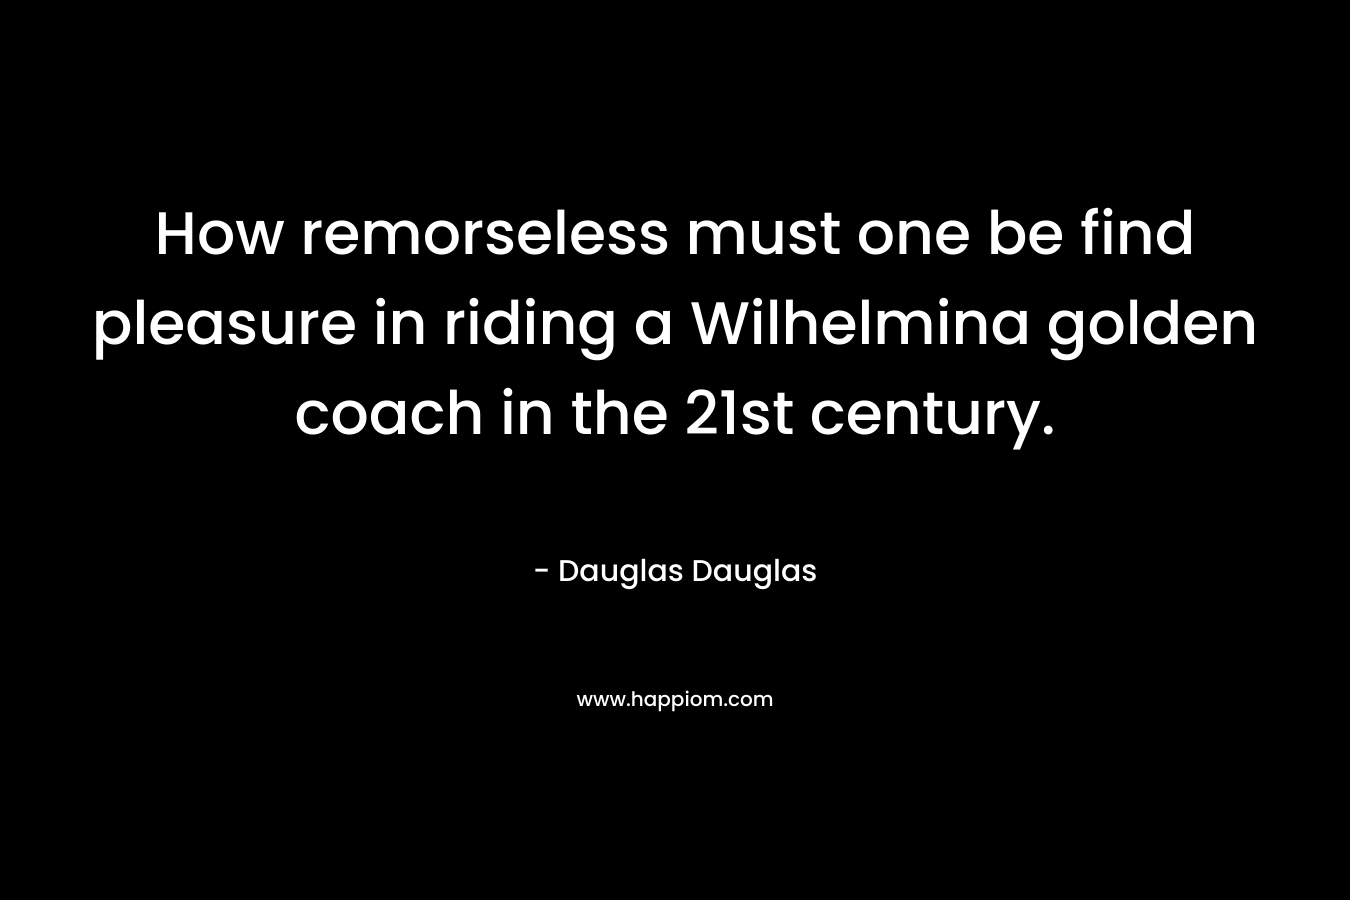 How remorseless must one be find pleasure in riding a Wilhelmina golden coach in the 21st century. – Dauglas Dauglas